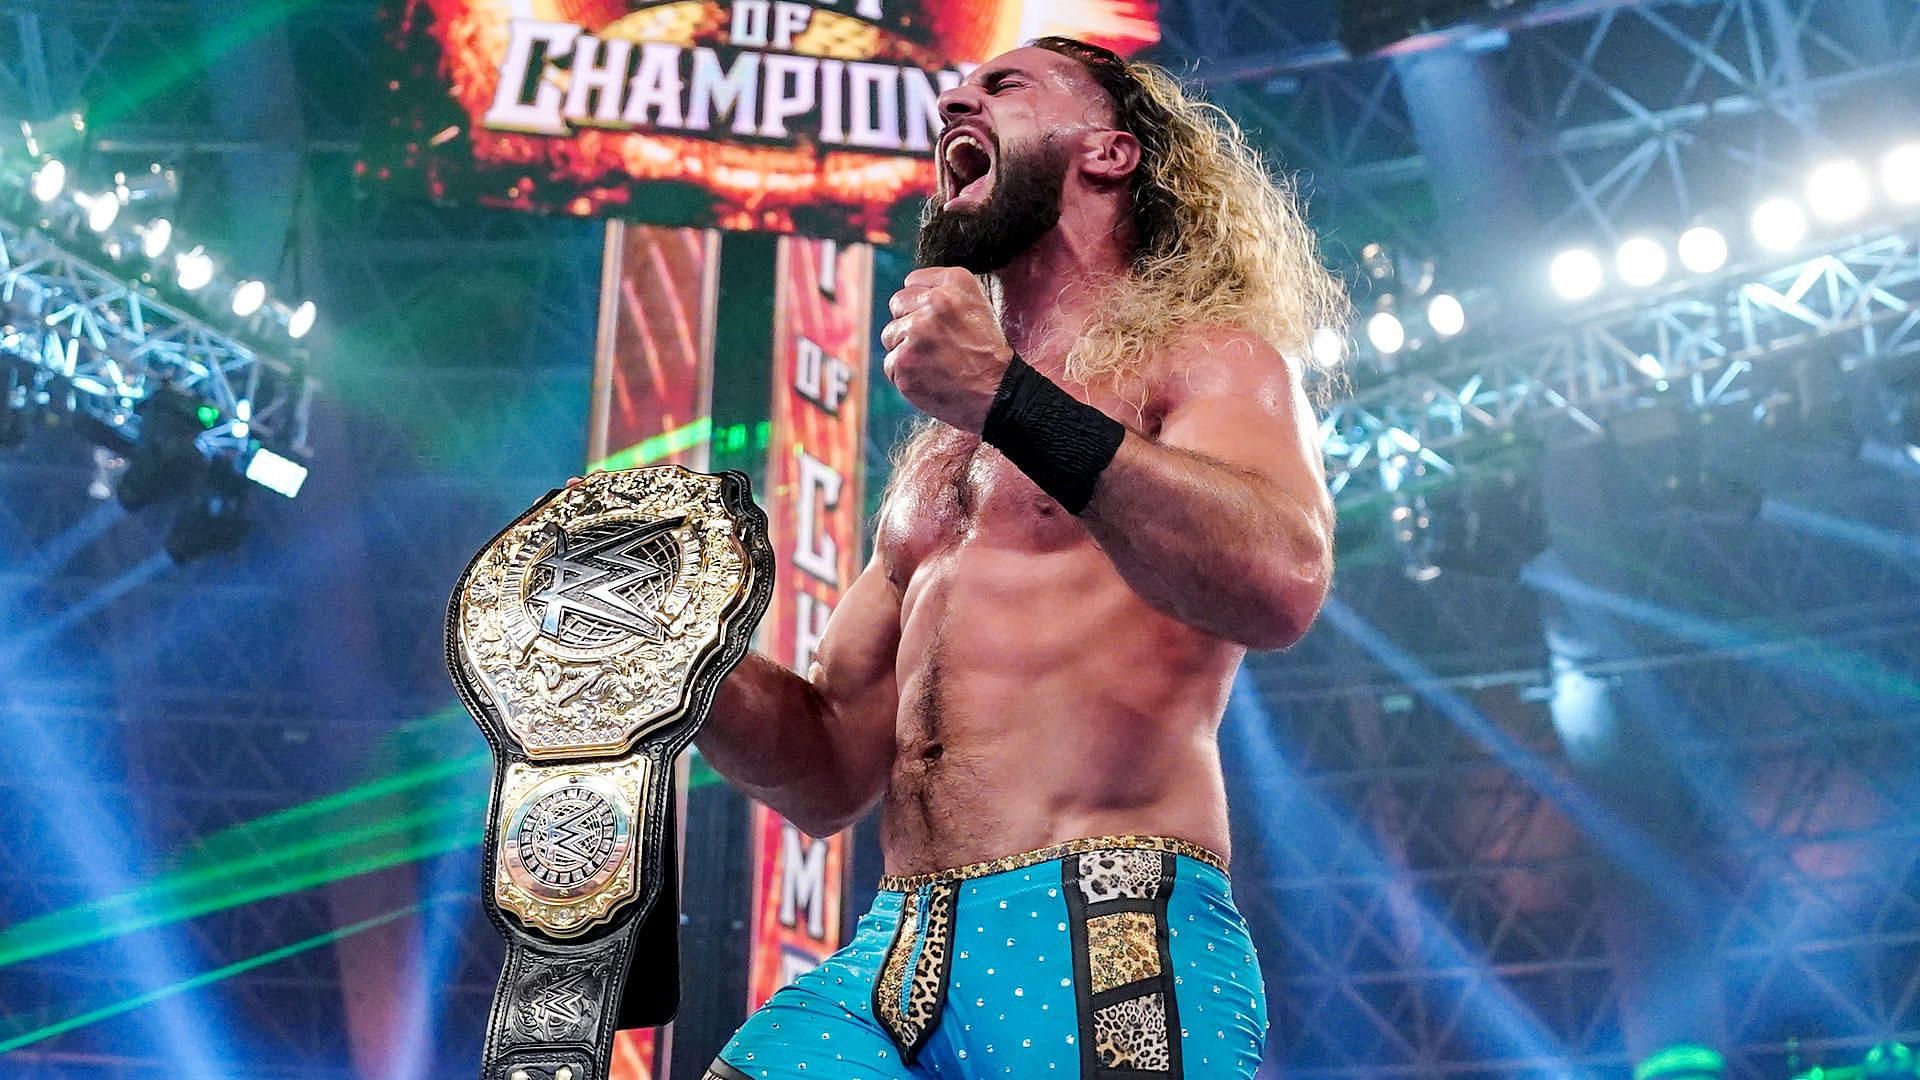 Seth Rollins defeated AJ Styles to become the World Heavyweight Champion